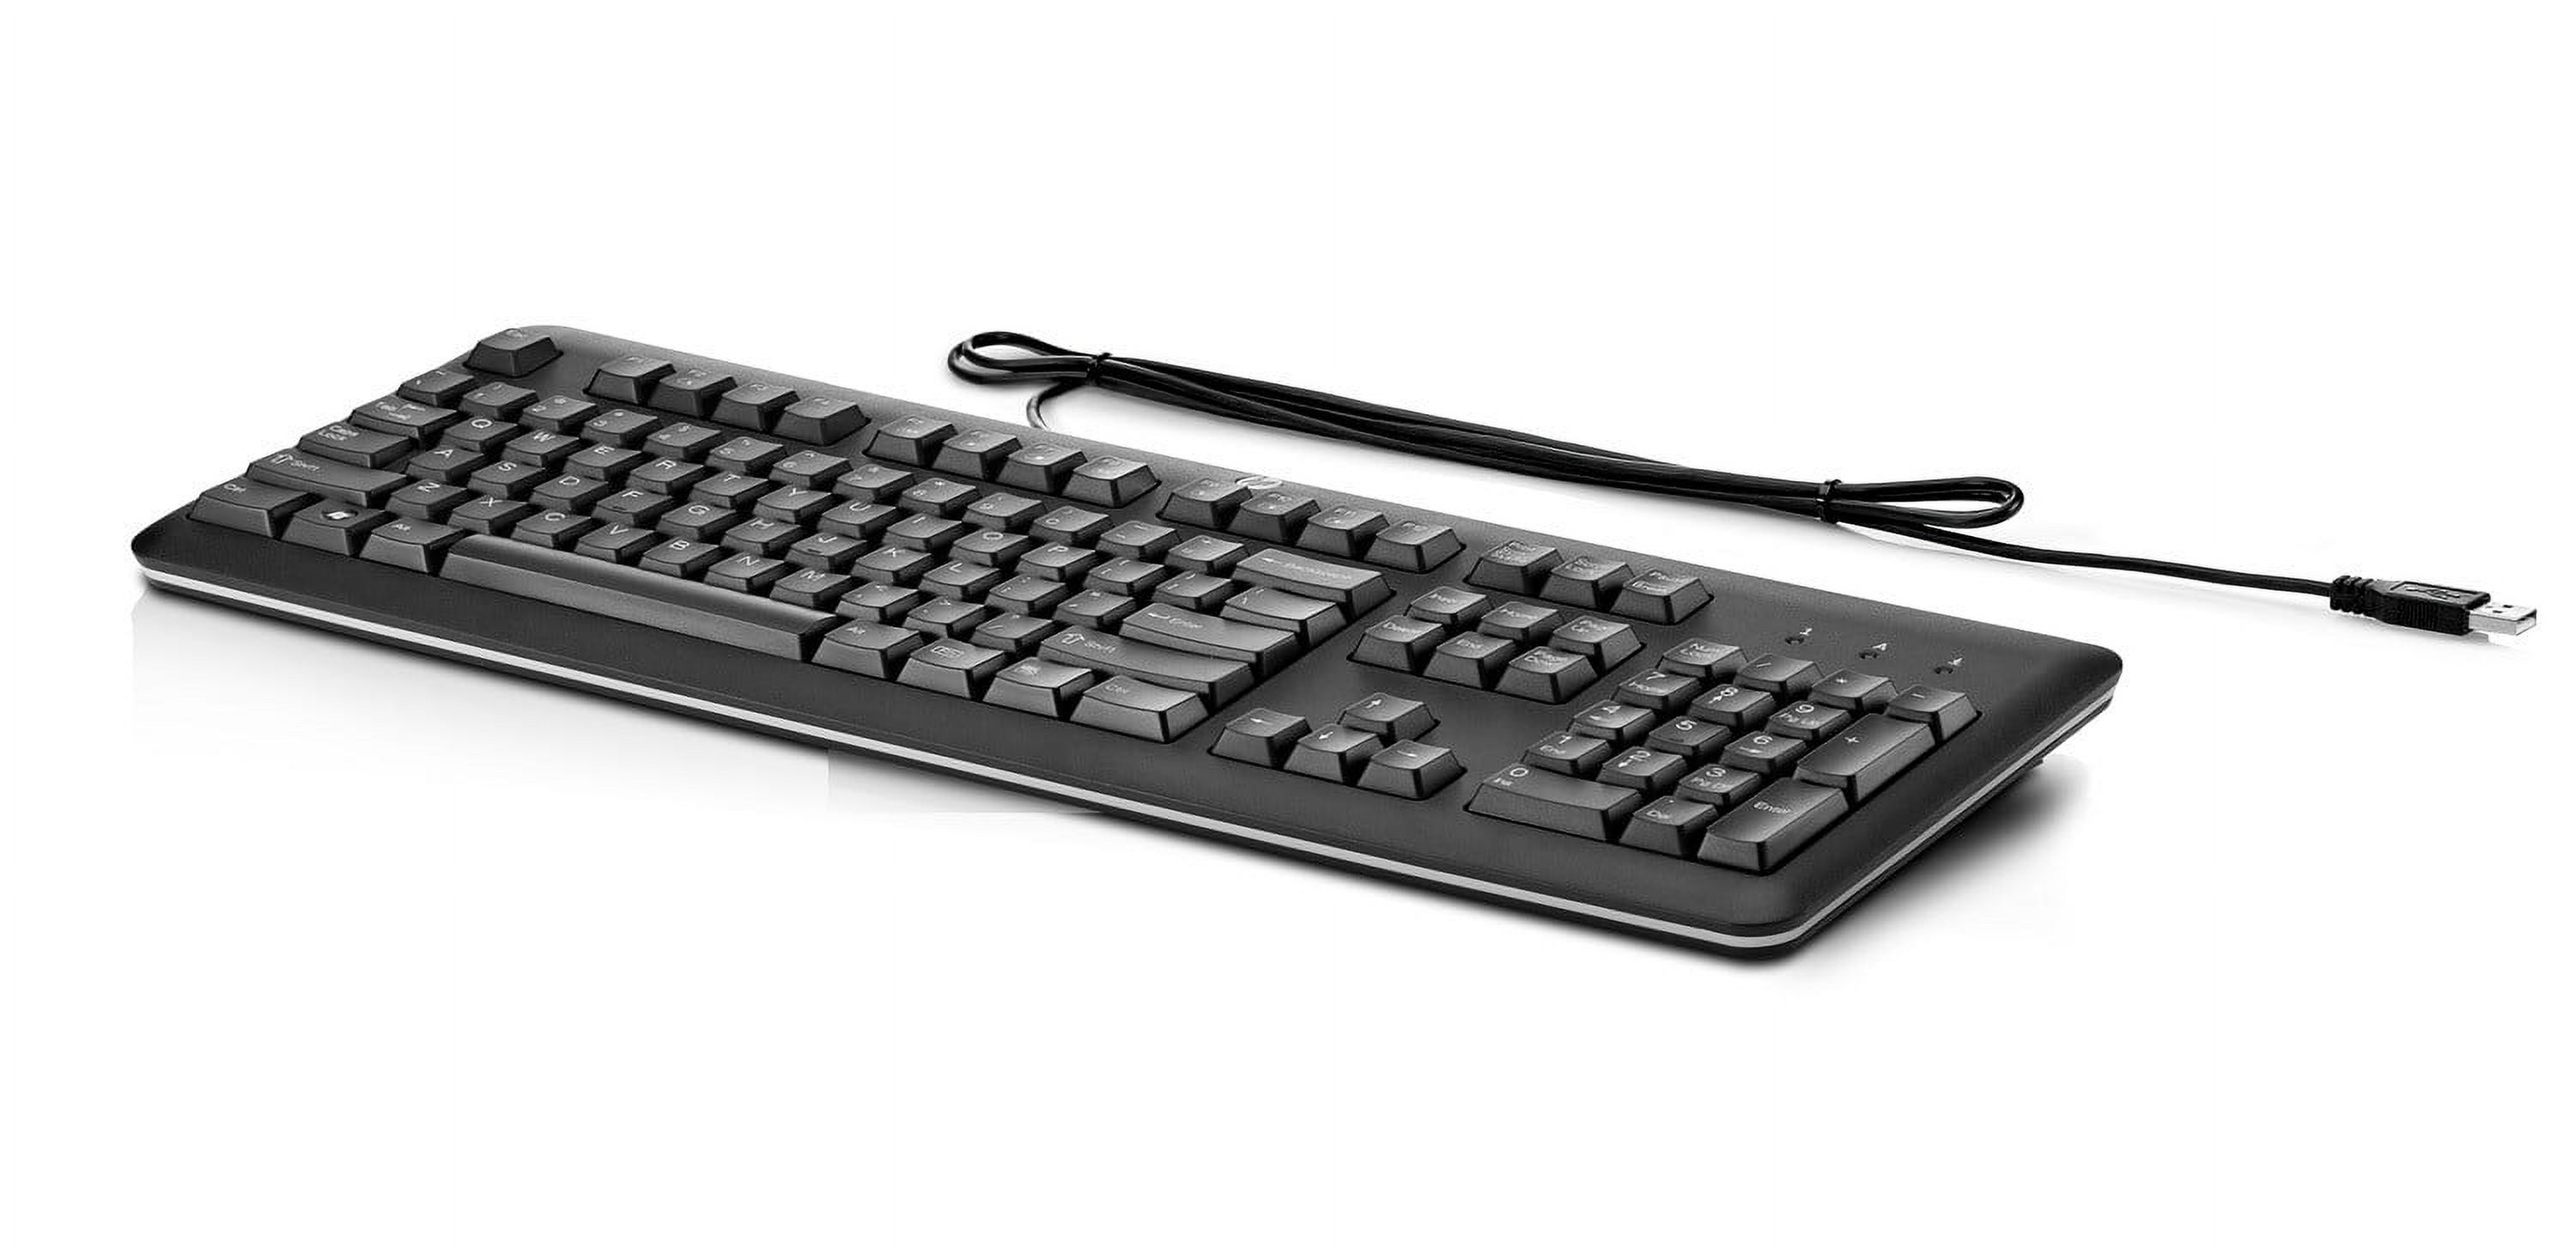 HP USB Keyboard for PC,USB (QY776AT#ABA) - image 1 of 7